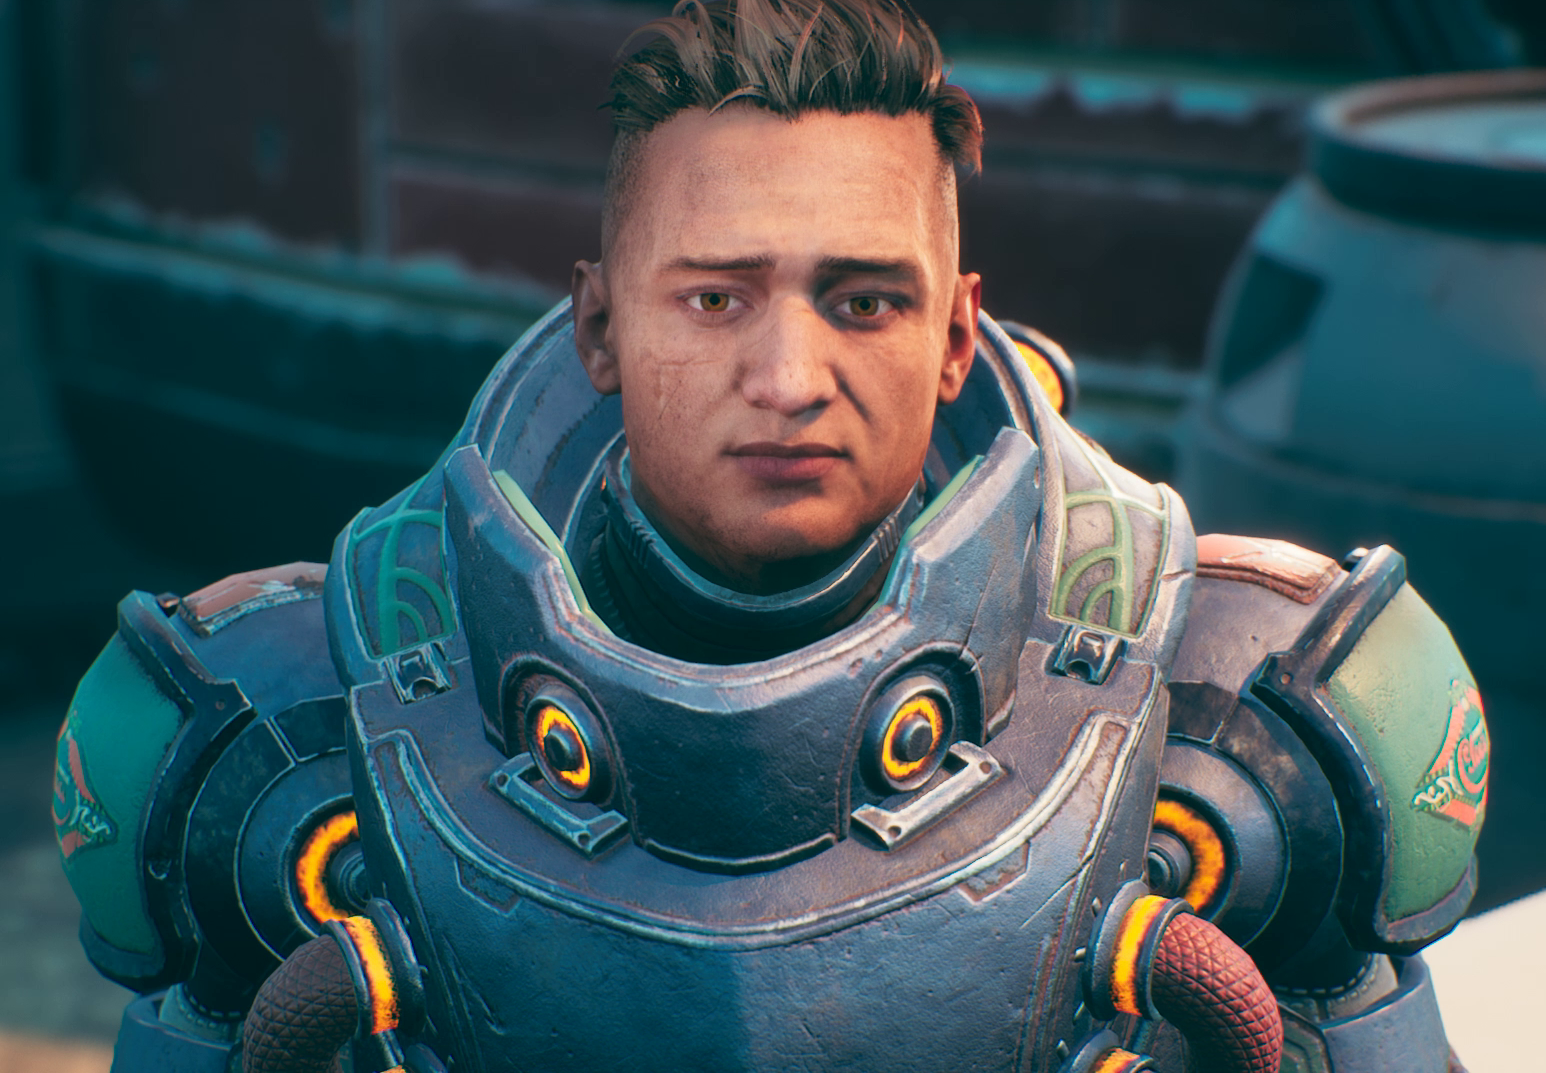 SAM, The Outer Worlds Wiki